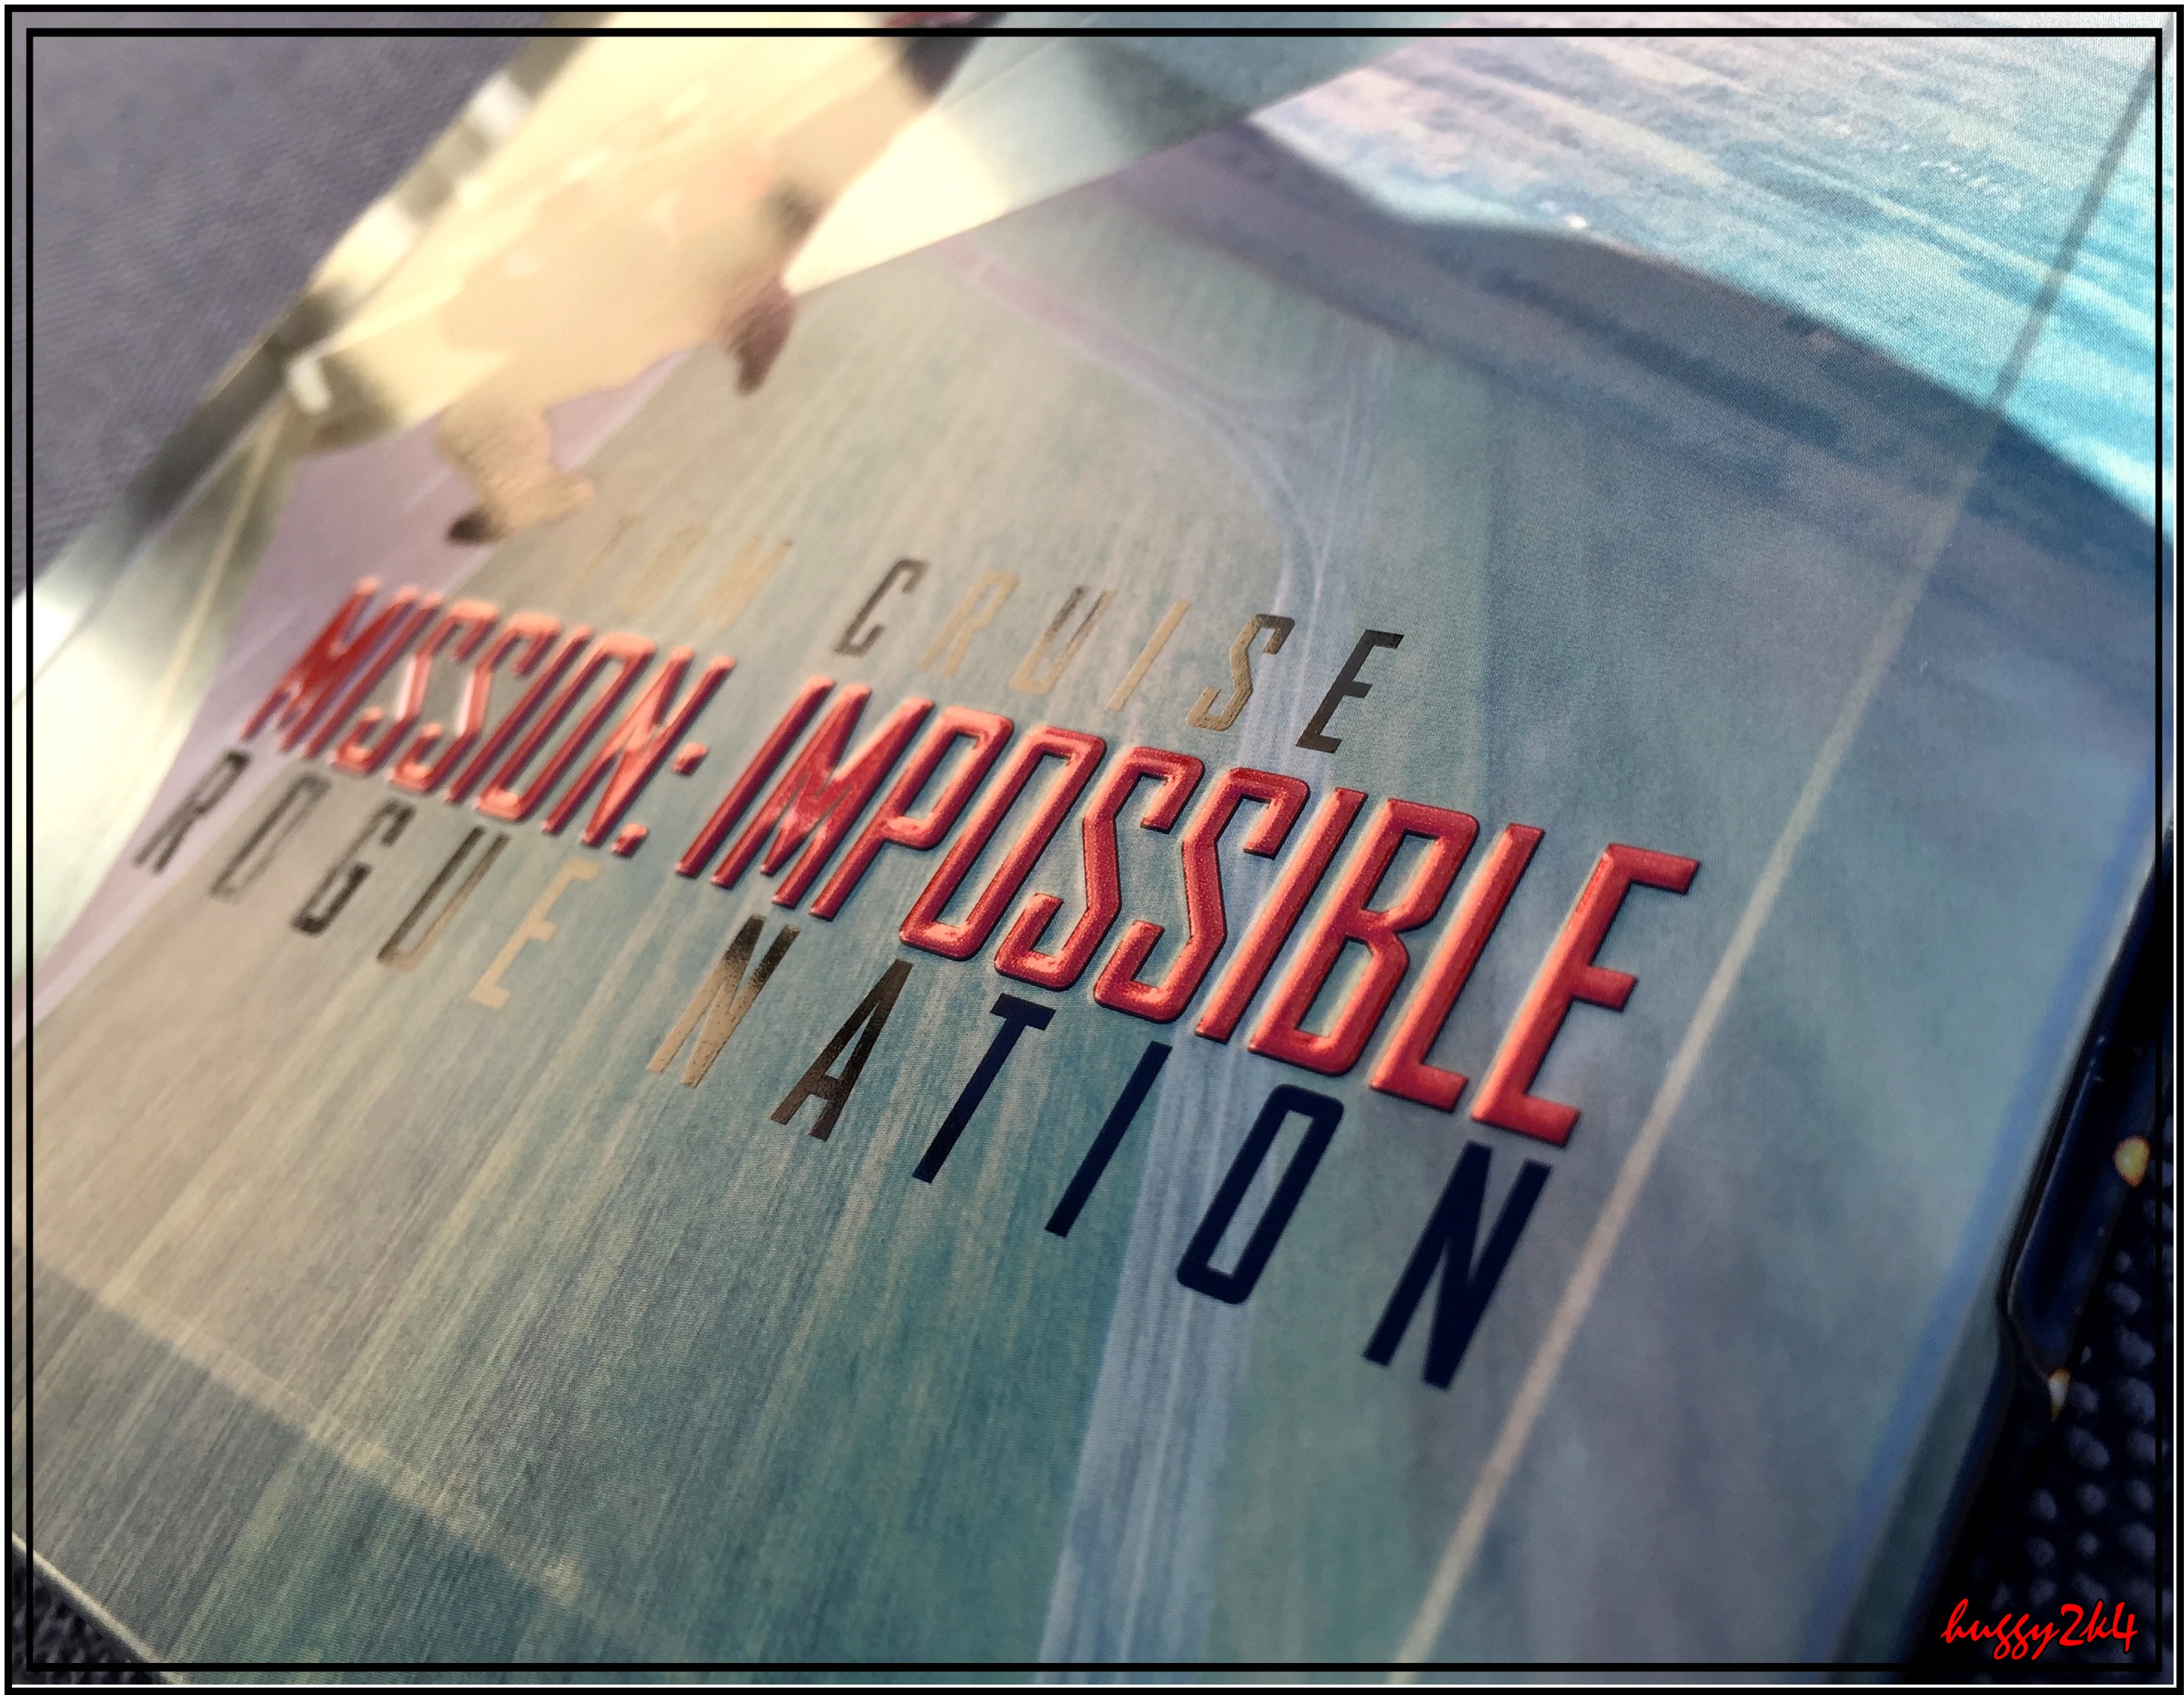 Mission Impossible5.4.jpg